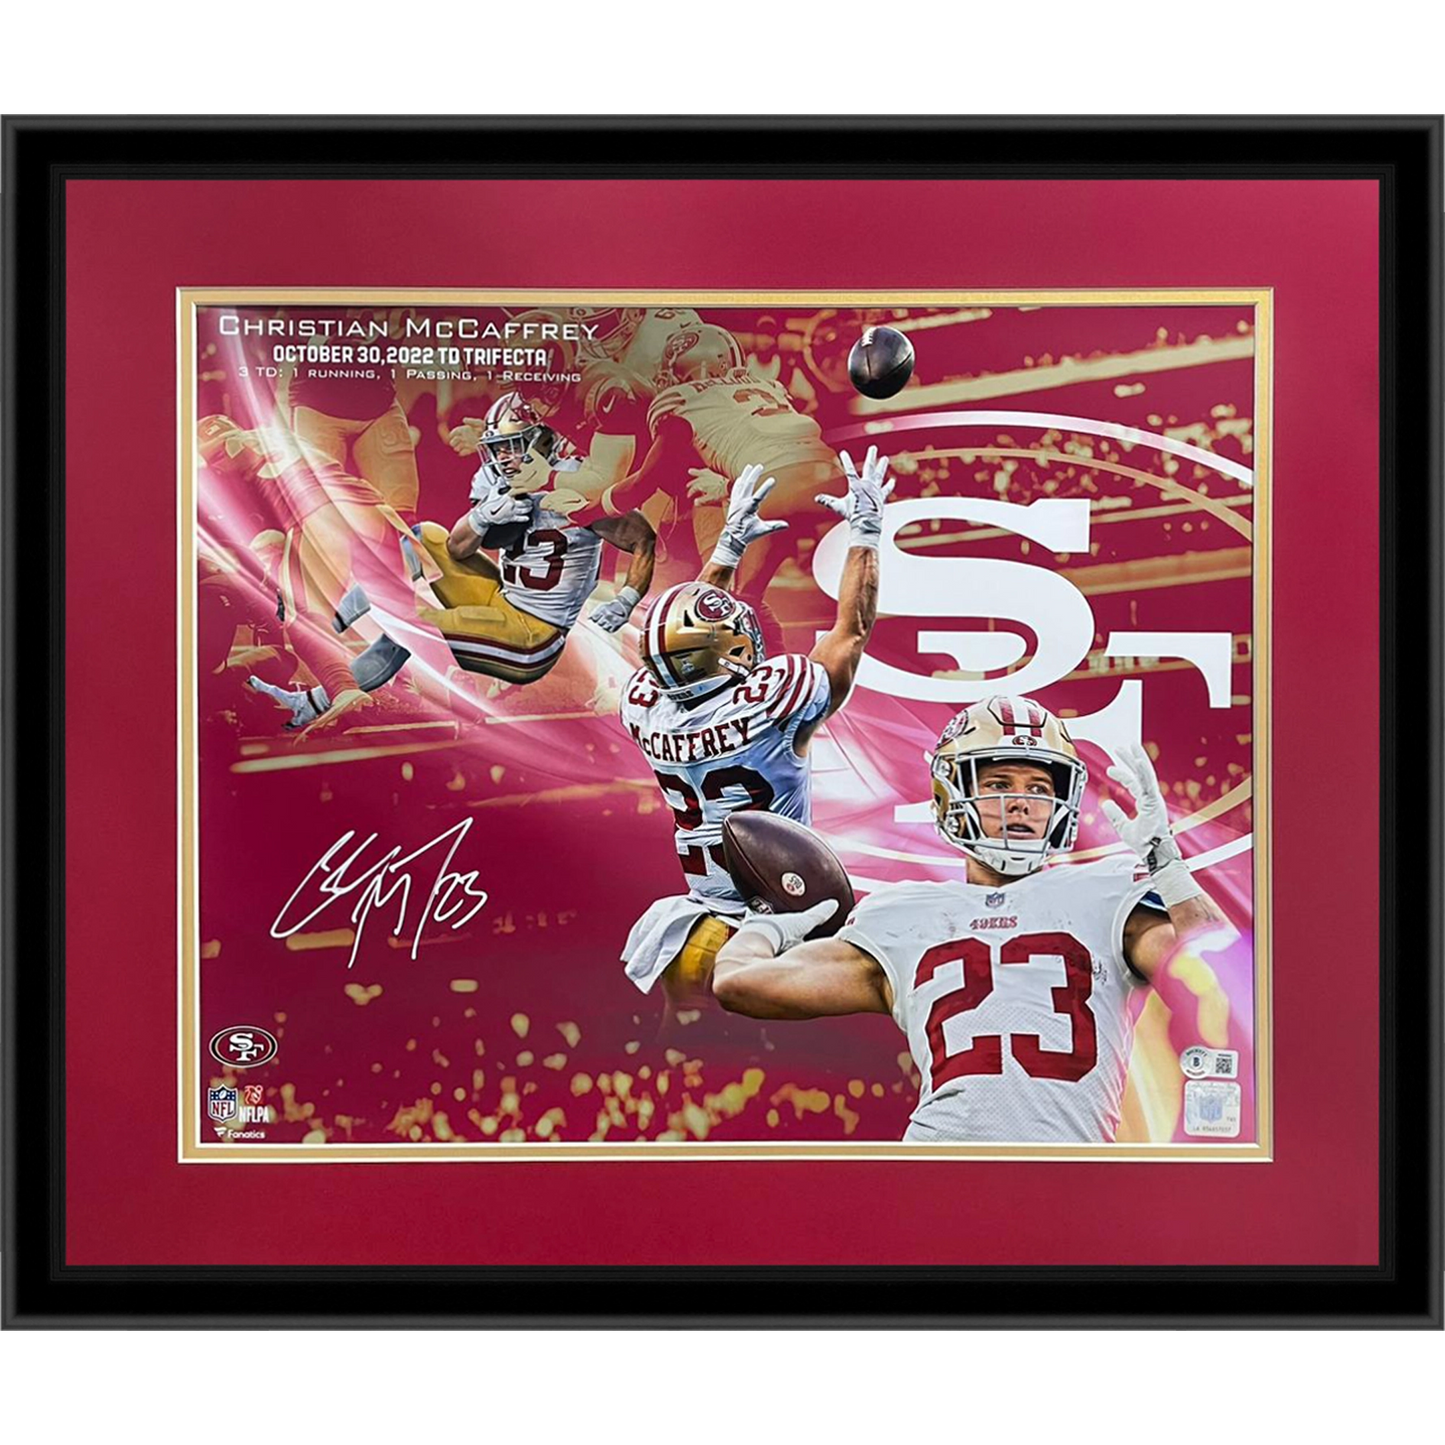 Christian McCaffrey Autographed San Francisco 49ers (Rushing Receiving Passing Touchdown Trifecta) Deluxe Framed 16x20 Photo - Beckett